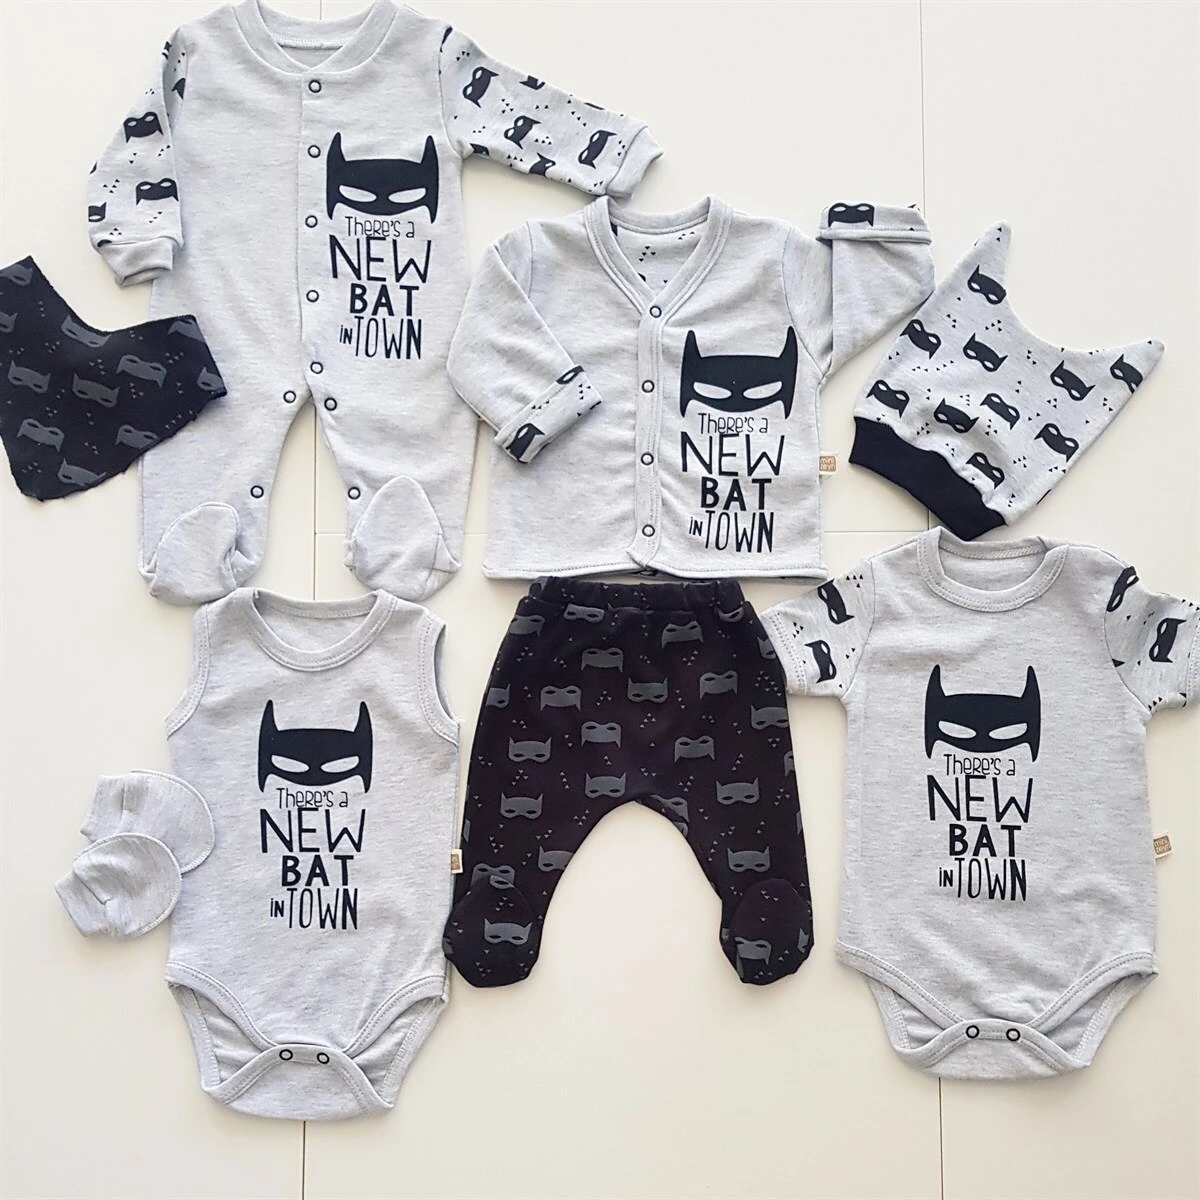 Baby Girl Boy Newborn Clothing 8-pcs Hospital Outlet Custom Fabric Antibacterial Babies Healthy Safe Outfit Sets Dresses - Baby's Sets - AliExpress